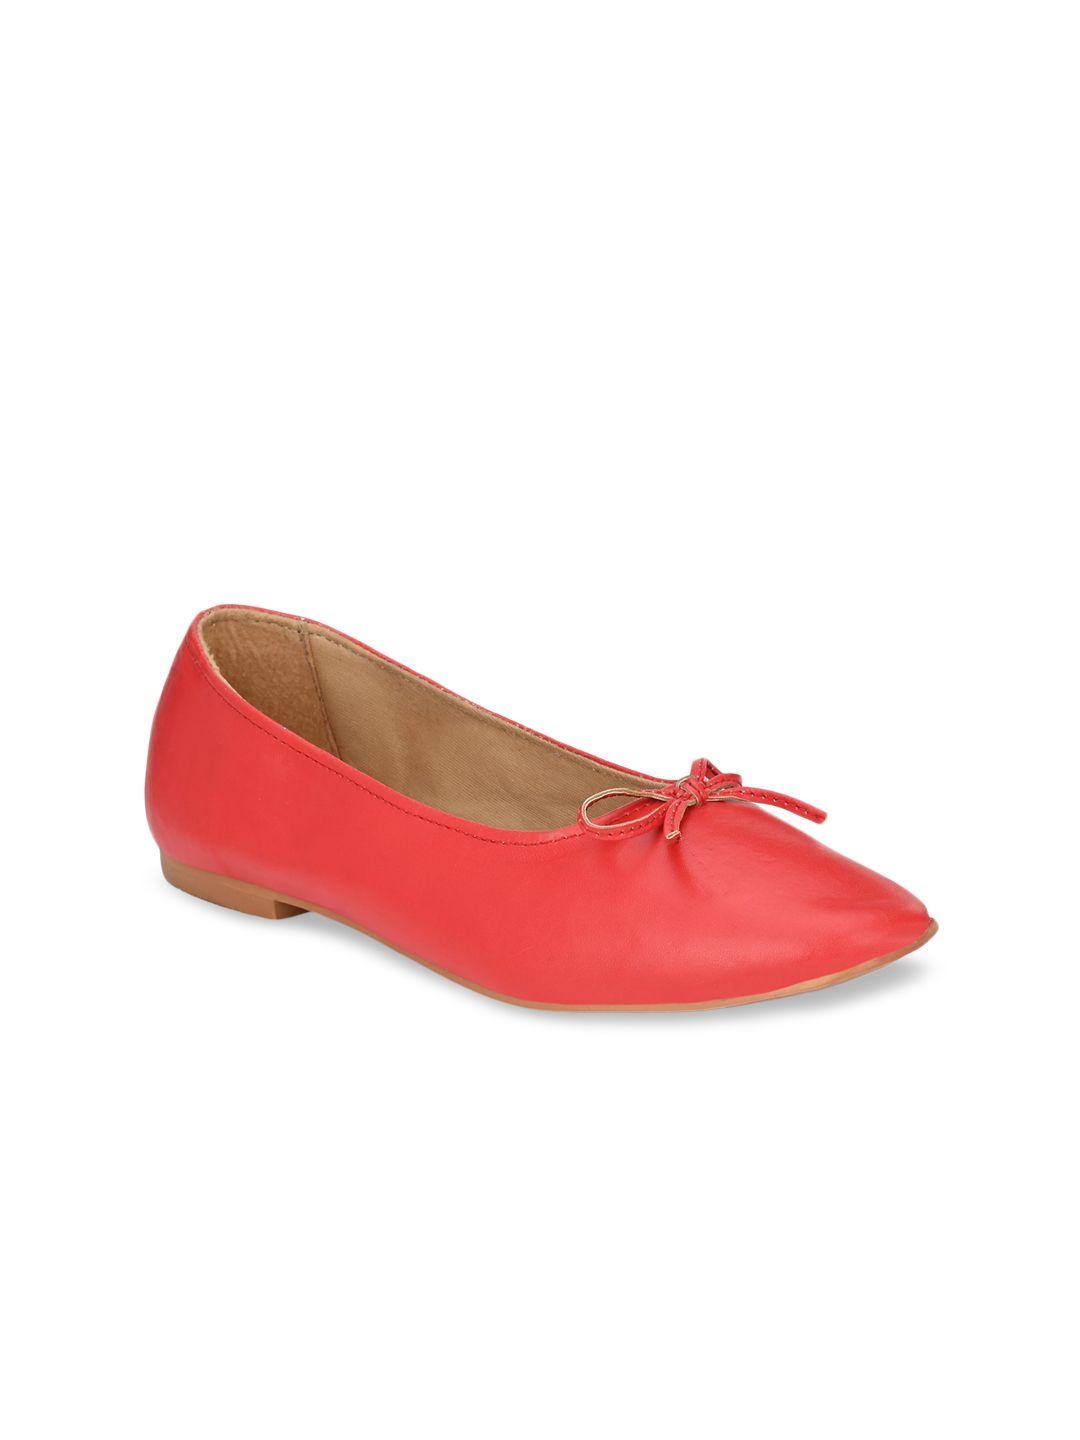 zebba women red ballerinas with bow detail